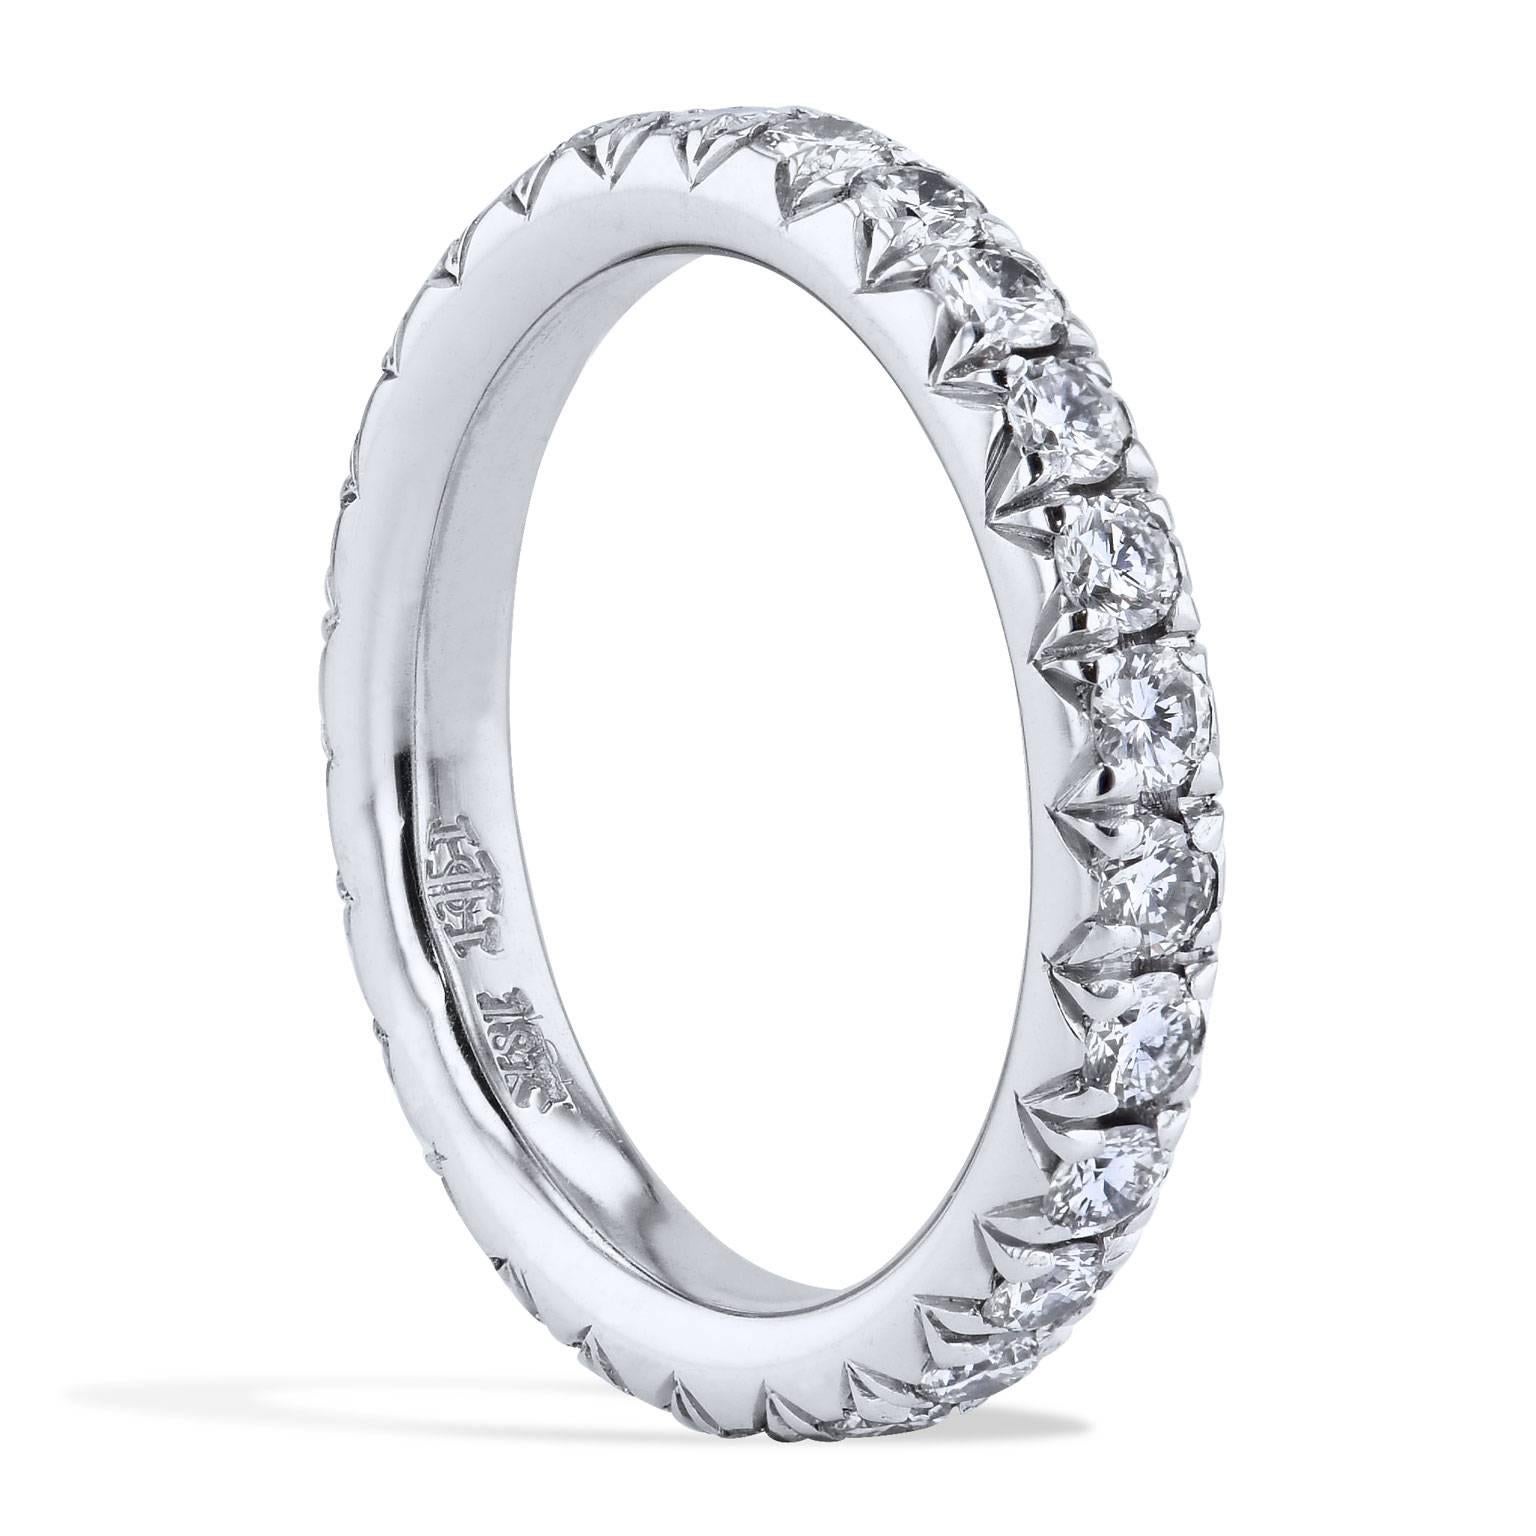 This handcrafted diamond eternity band ring features 1.00 carat of pave-set diamond (G/H/VS2) fashioned in 18 karat palladium with a split V detail that opens the eye, and allows the ring to pop with light.